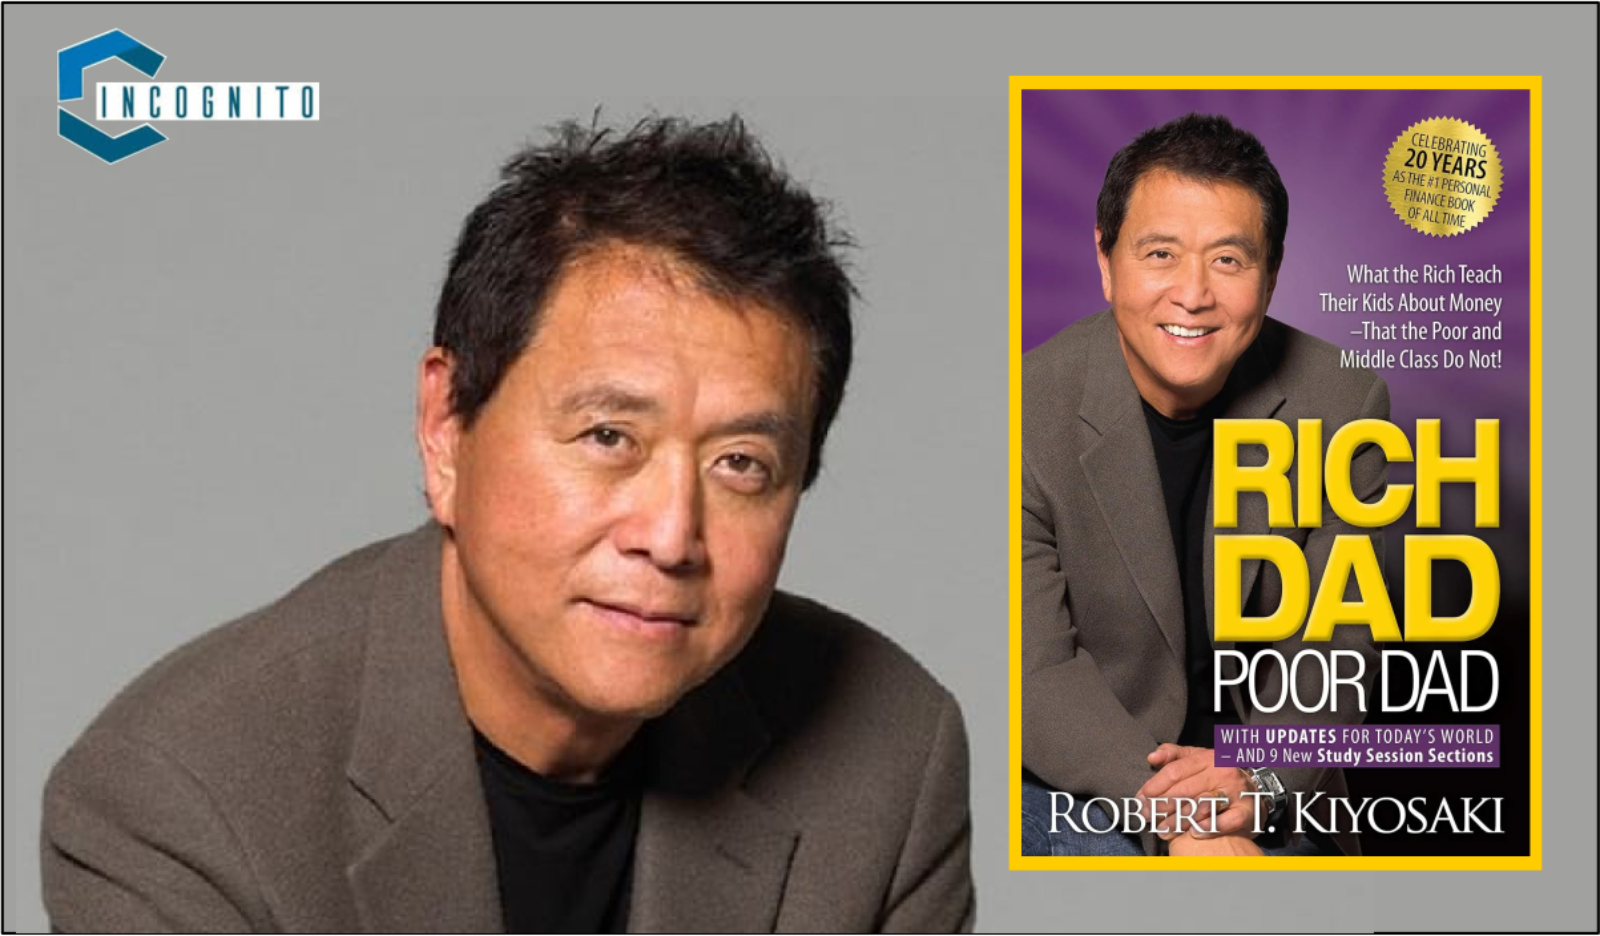 Robert Kiyosaki Net Worth: Does The Author of Rich Dad And Poor Dad Really Have 100 Million Dollars?